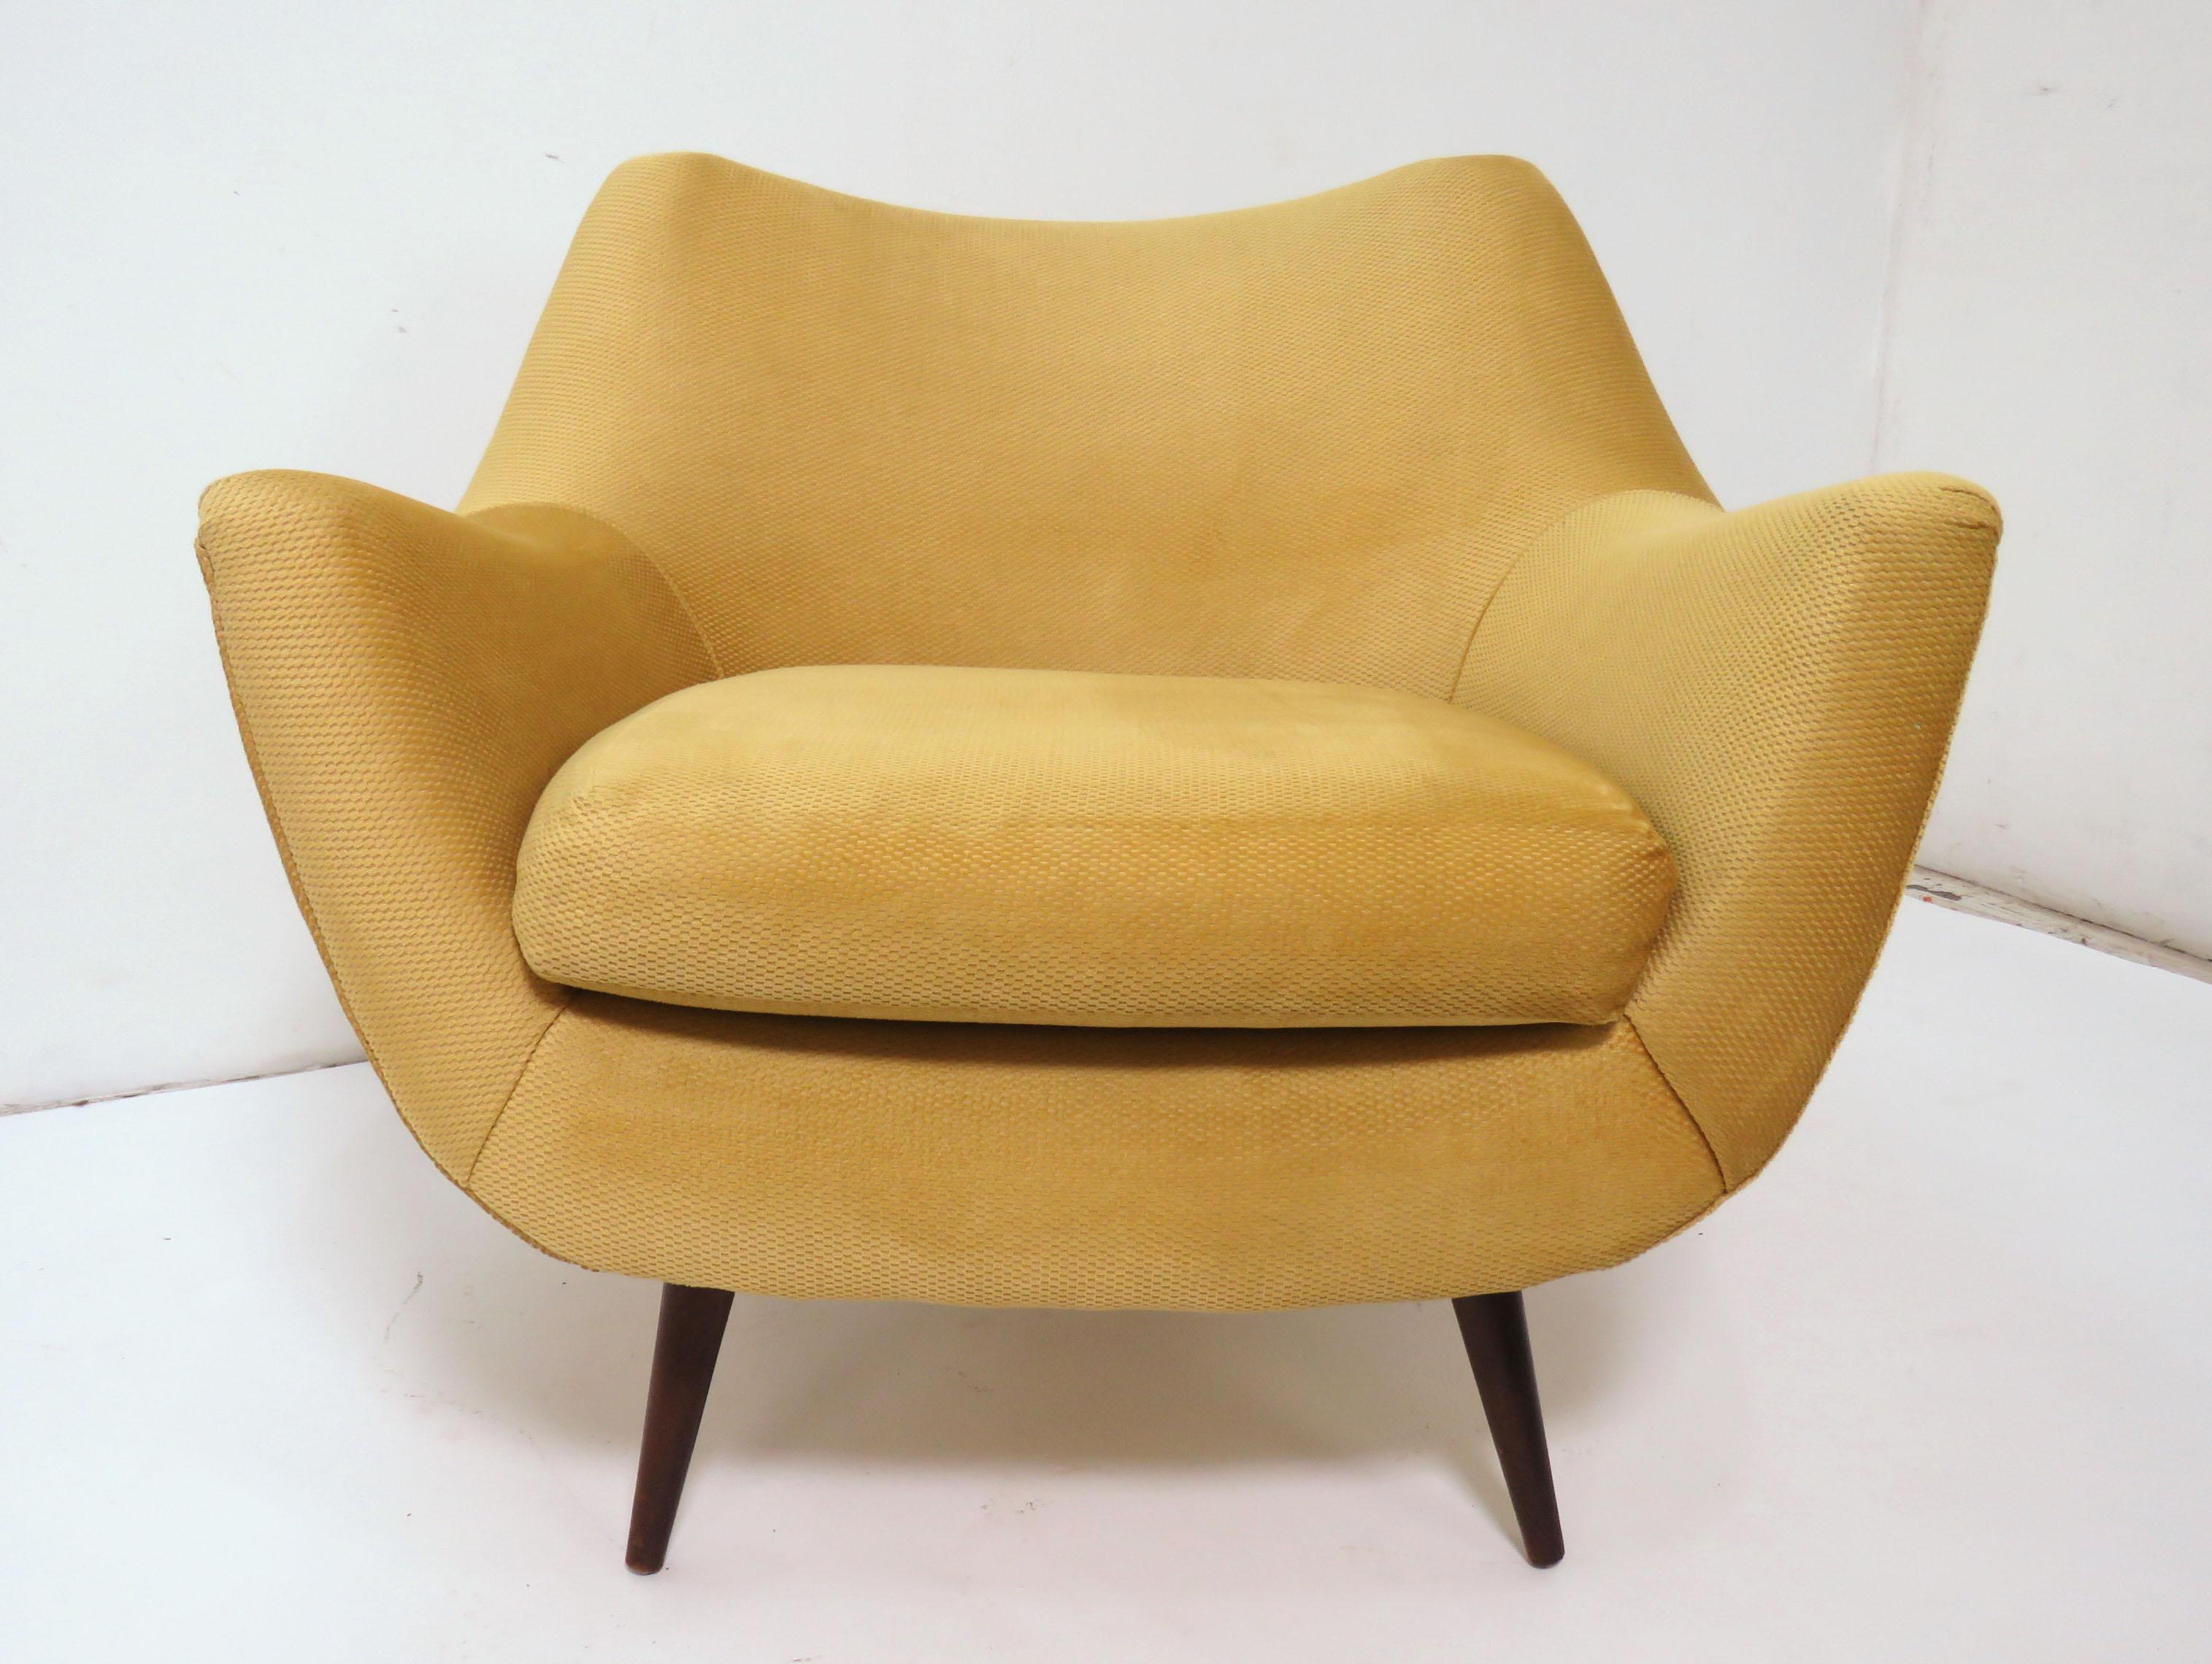 Mid-20th Century Lawrence Peabody Midcentury Lounge Chair and Ottoman, circa 1950s